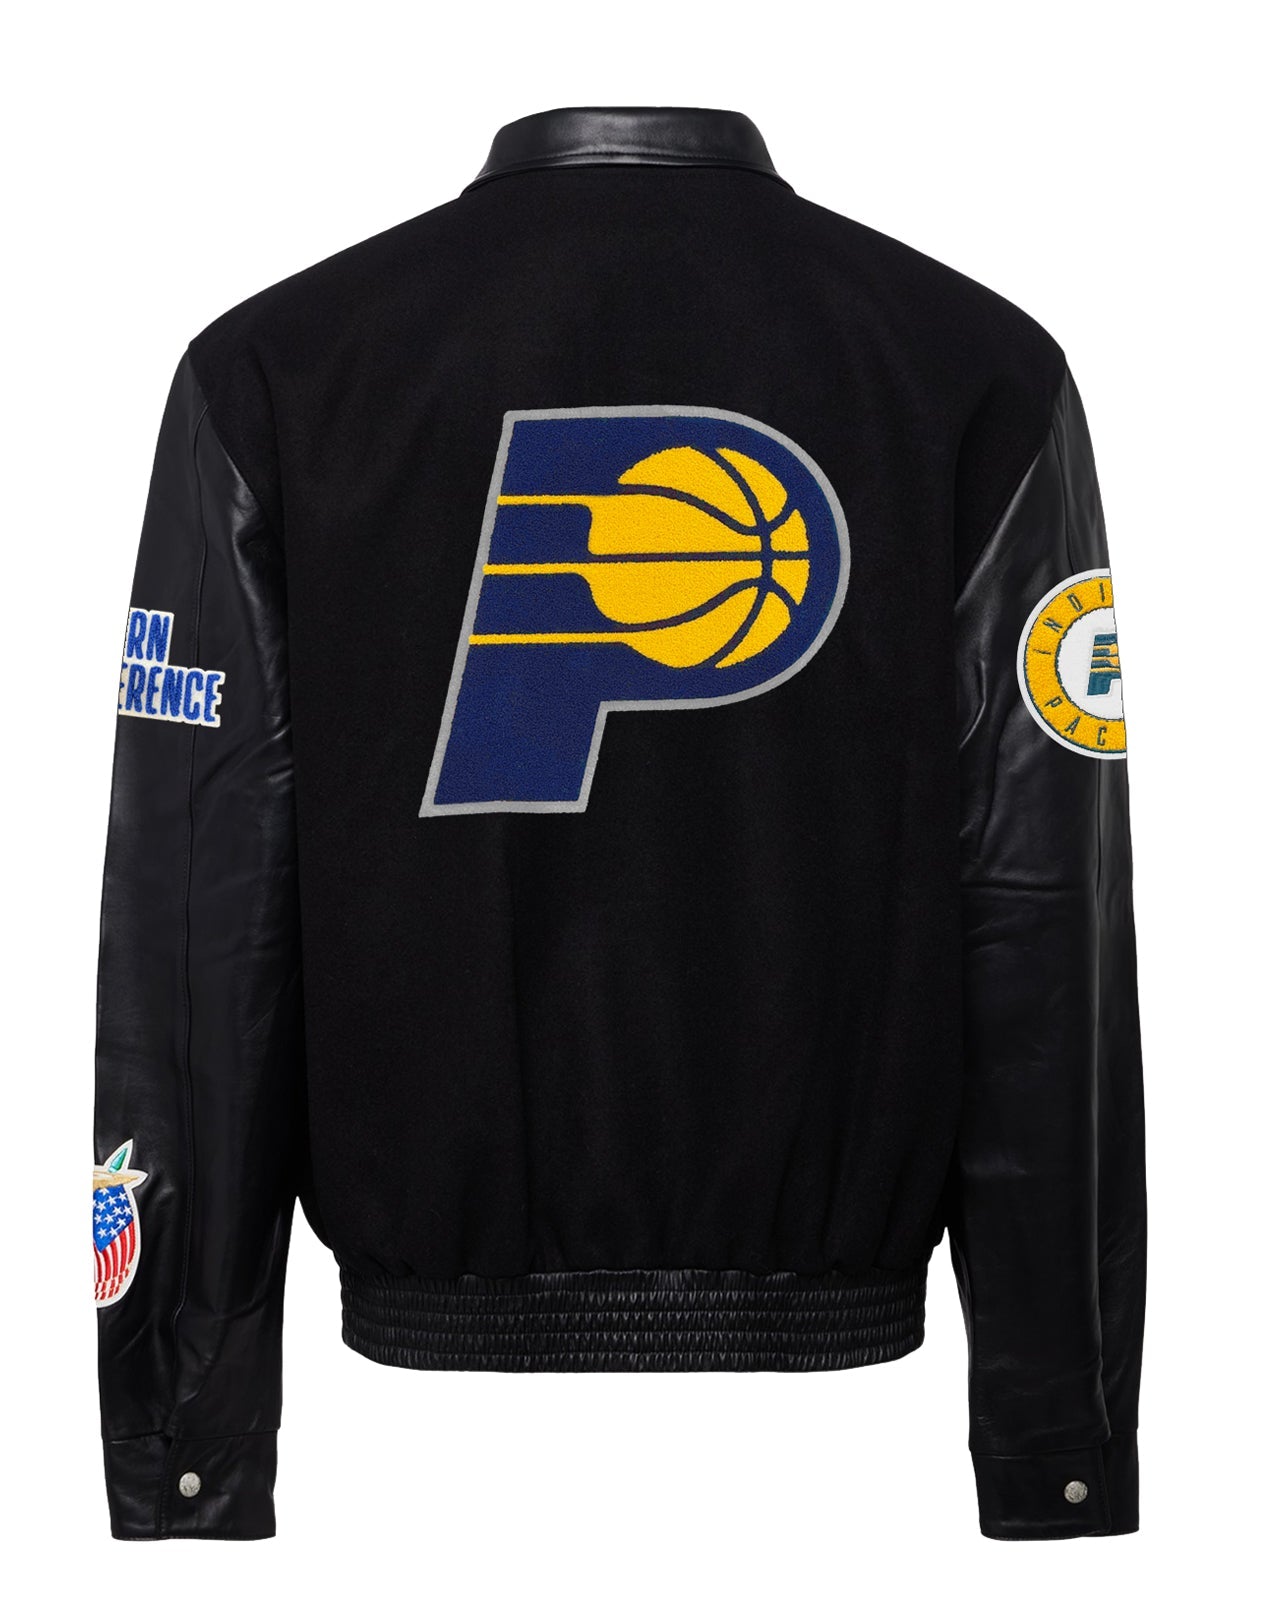 INDIANA PACERS WOOL & LEATHER JACKET Black